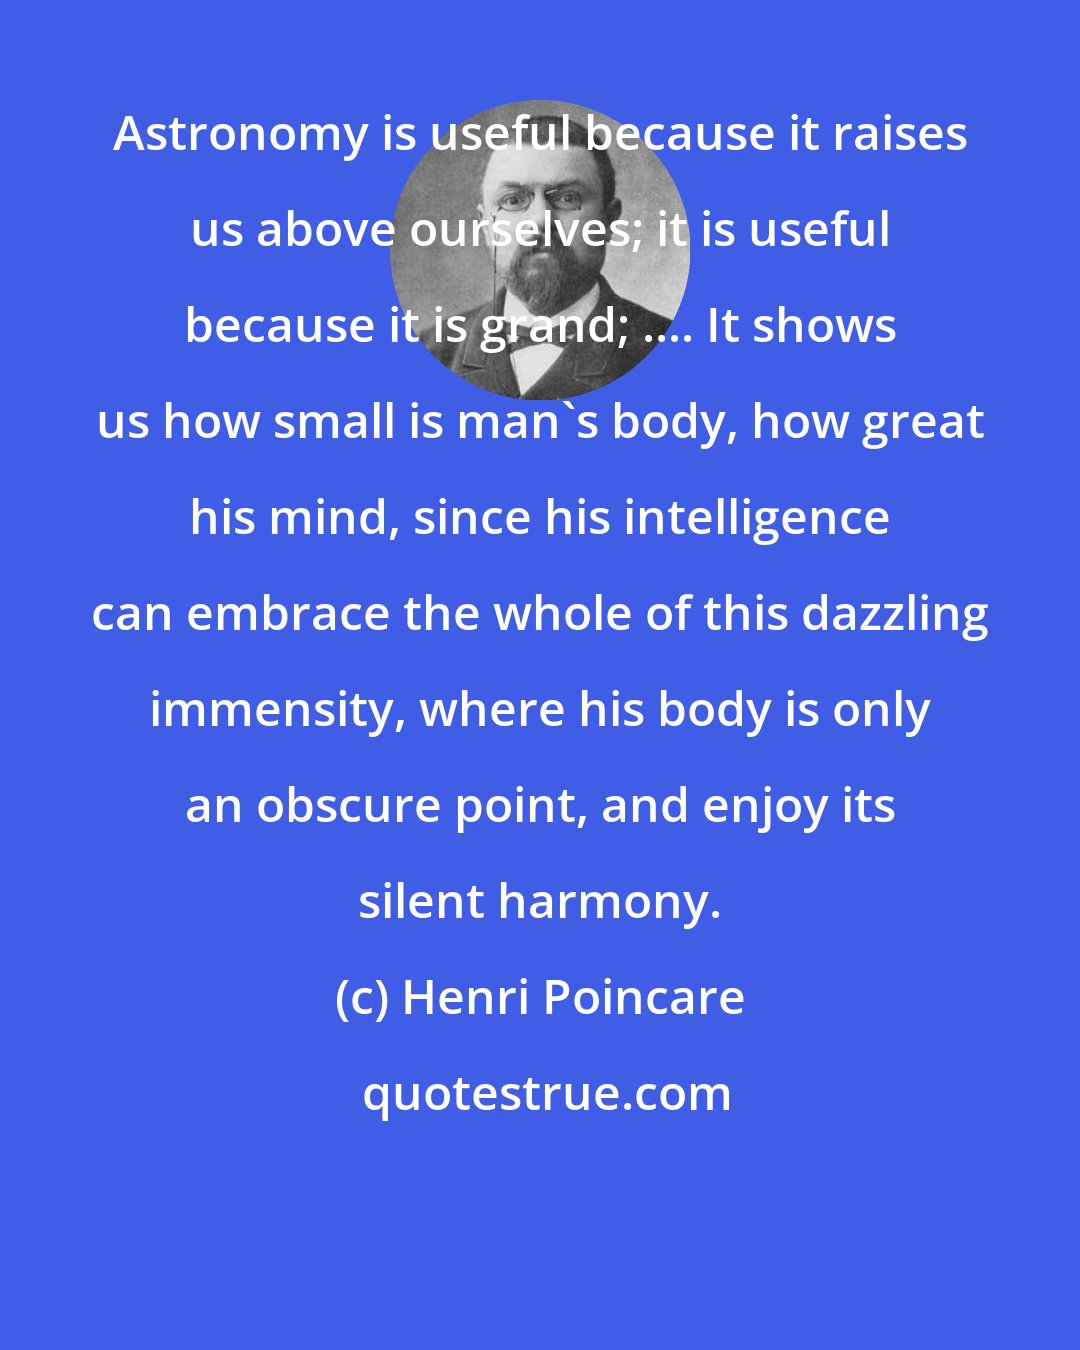 Henri Poincare: Astronomy is useful because it raises us above ourselves; it is useful because it is grand; .... It shows us how small is man's body, how great his mind, since his intelligence can embrace the whole of this dazzling immensity, where his body is only an obscure point, and enjoy its silent harmony.